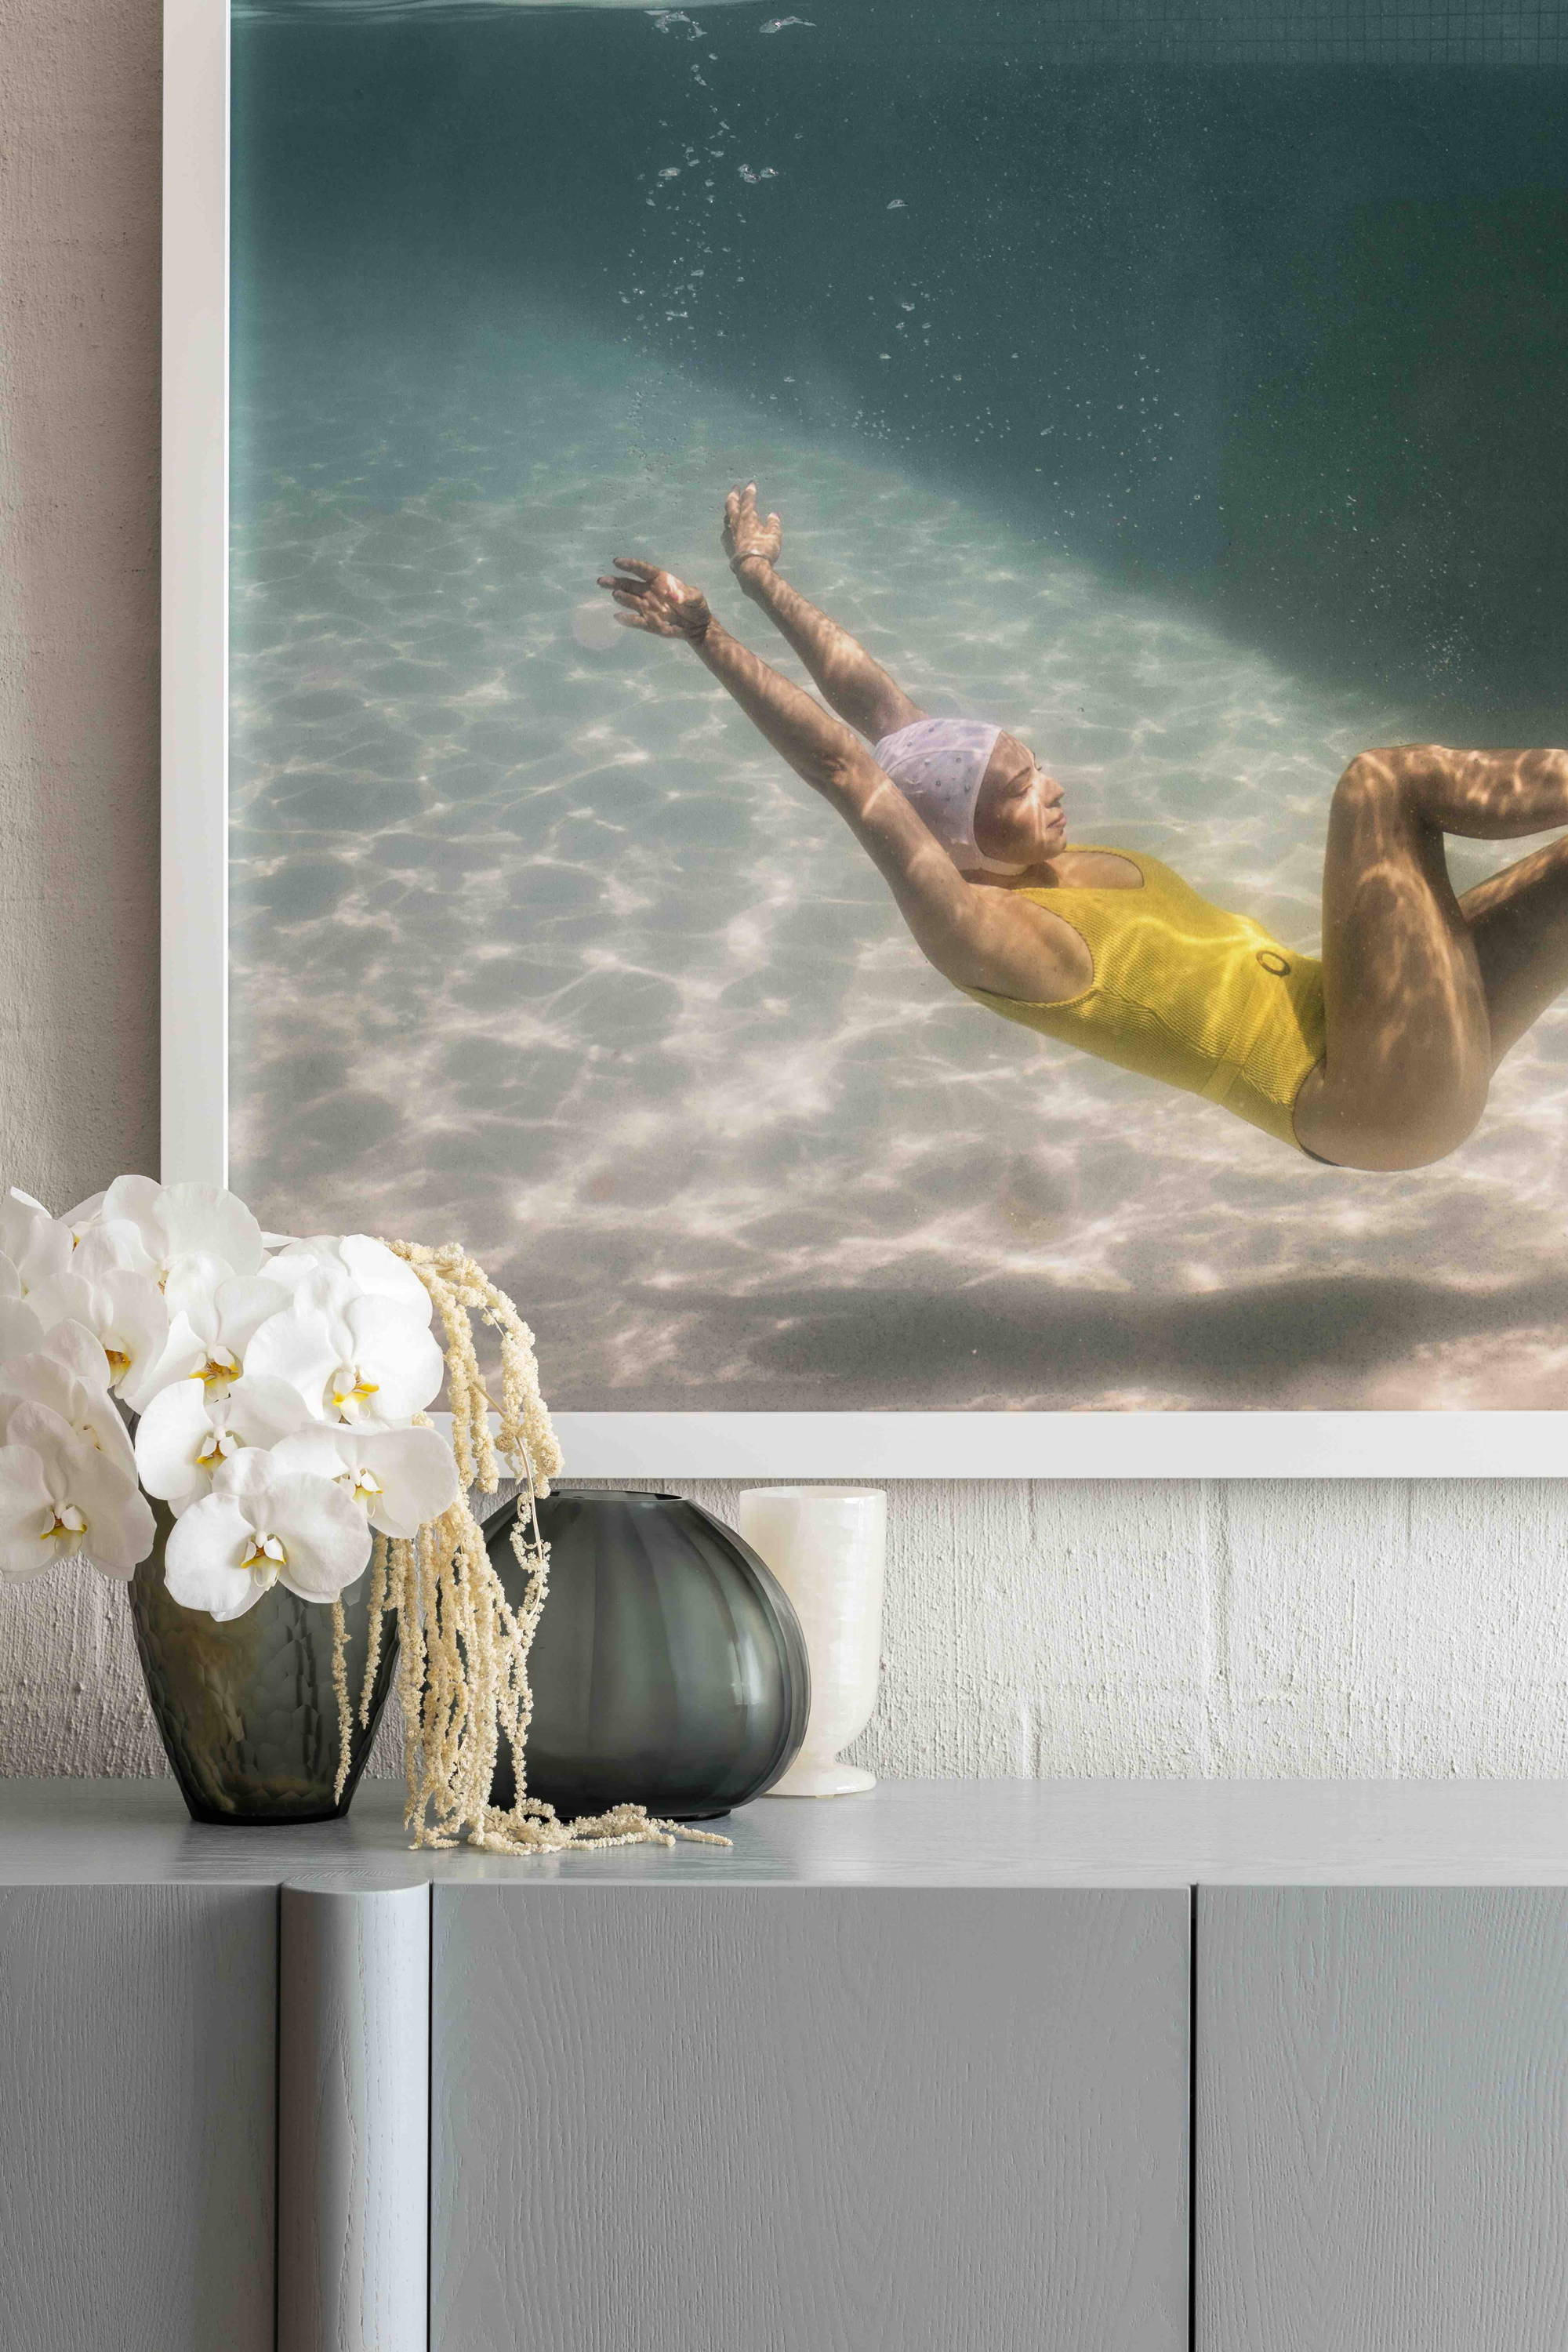 Halcyon Daze 1 by Francesca Owen - Underwater photography of a synchronised swimmer in yellow leotard and white cap posing underwater.